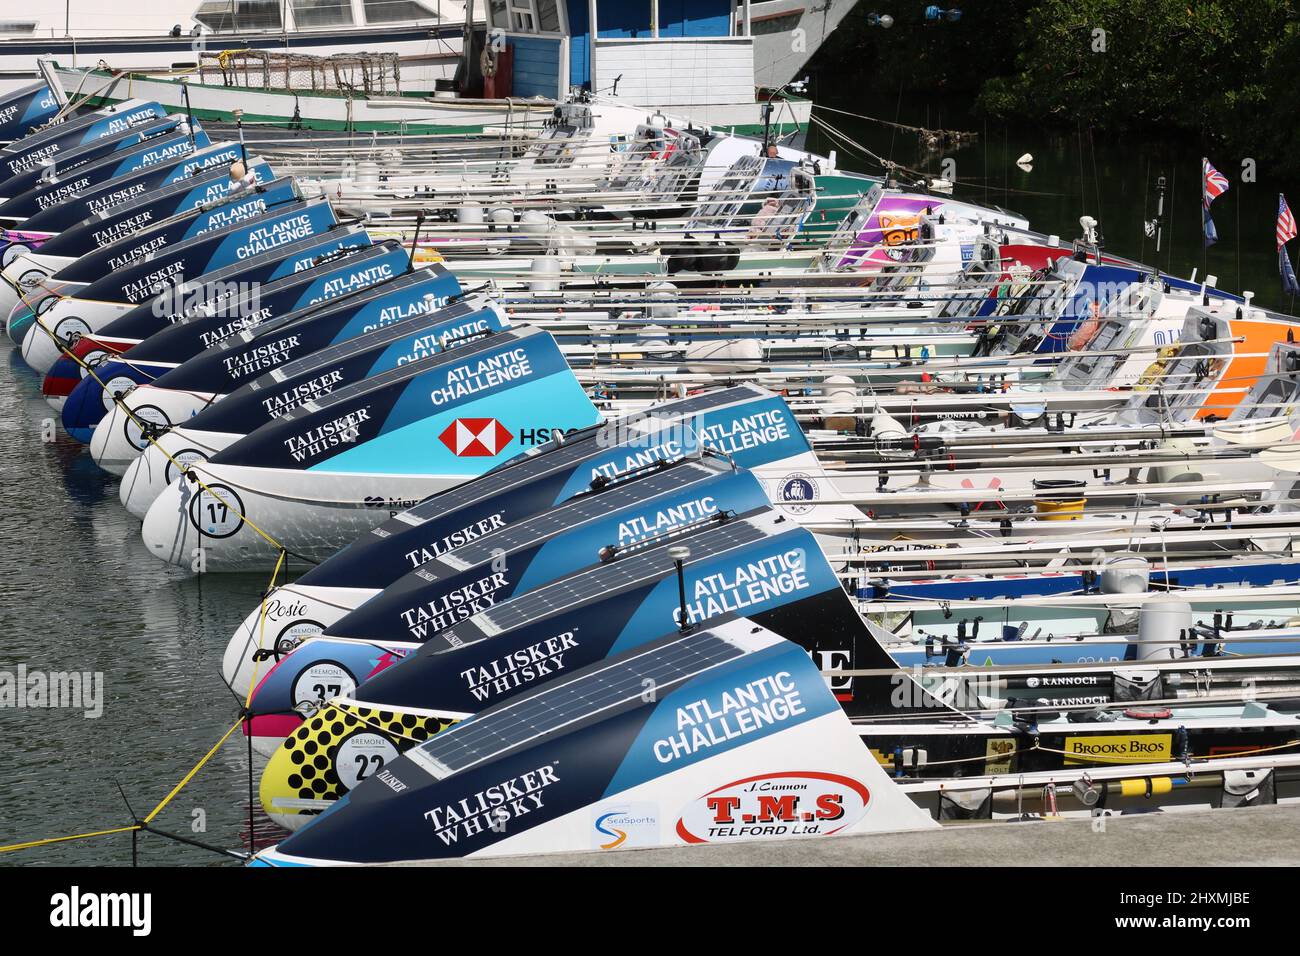 Rows of Atlantic Challenge Rowing boats awaiting transportation after the race is finished Stock Photo